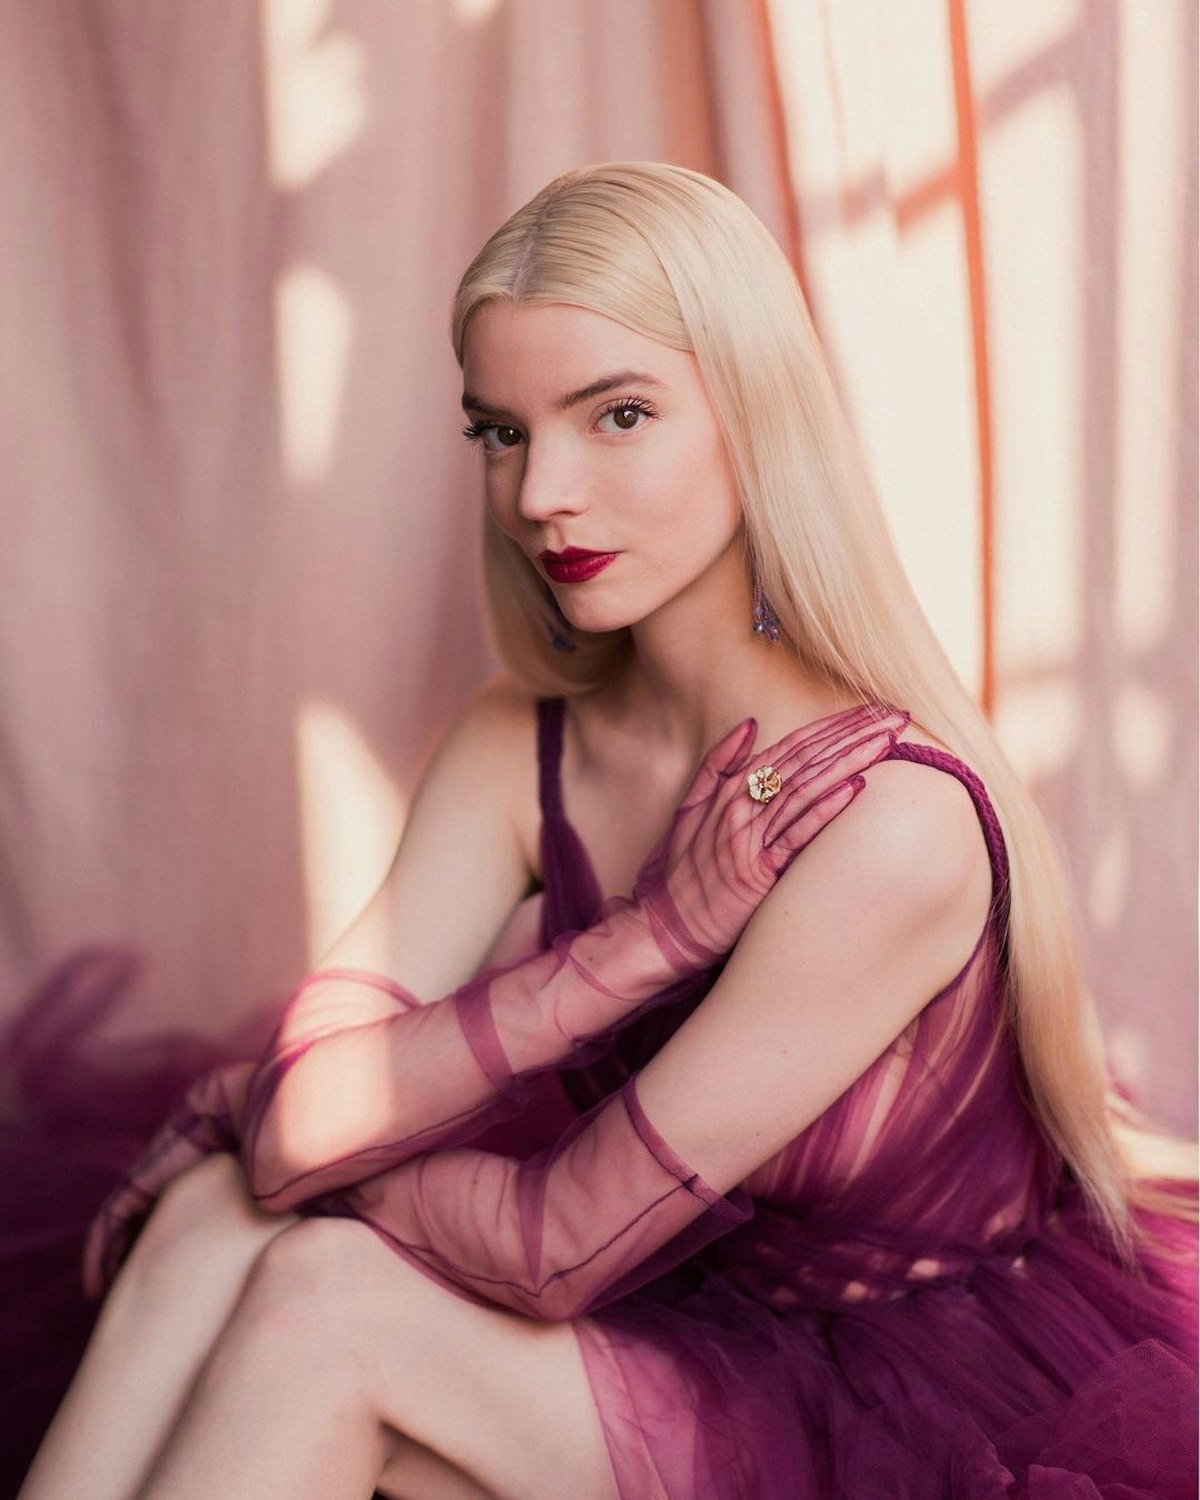 Anya Taylor-Joy Opens Up About Handling a Frightening Paparazzi